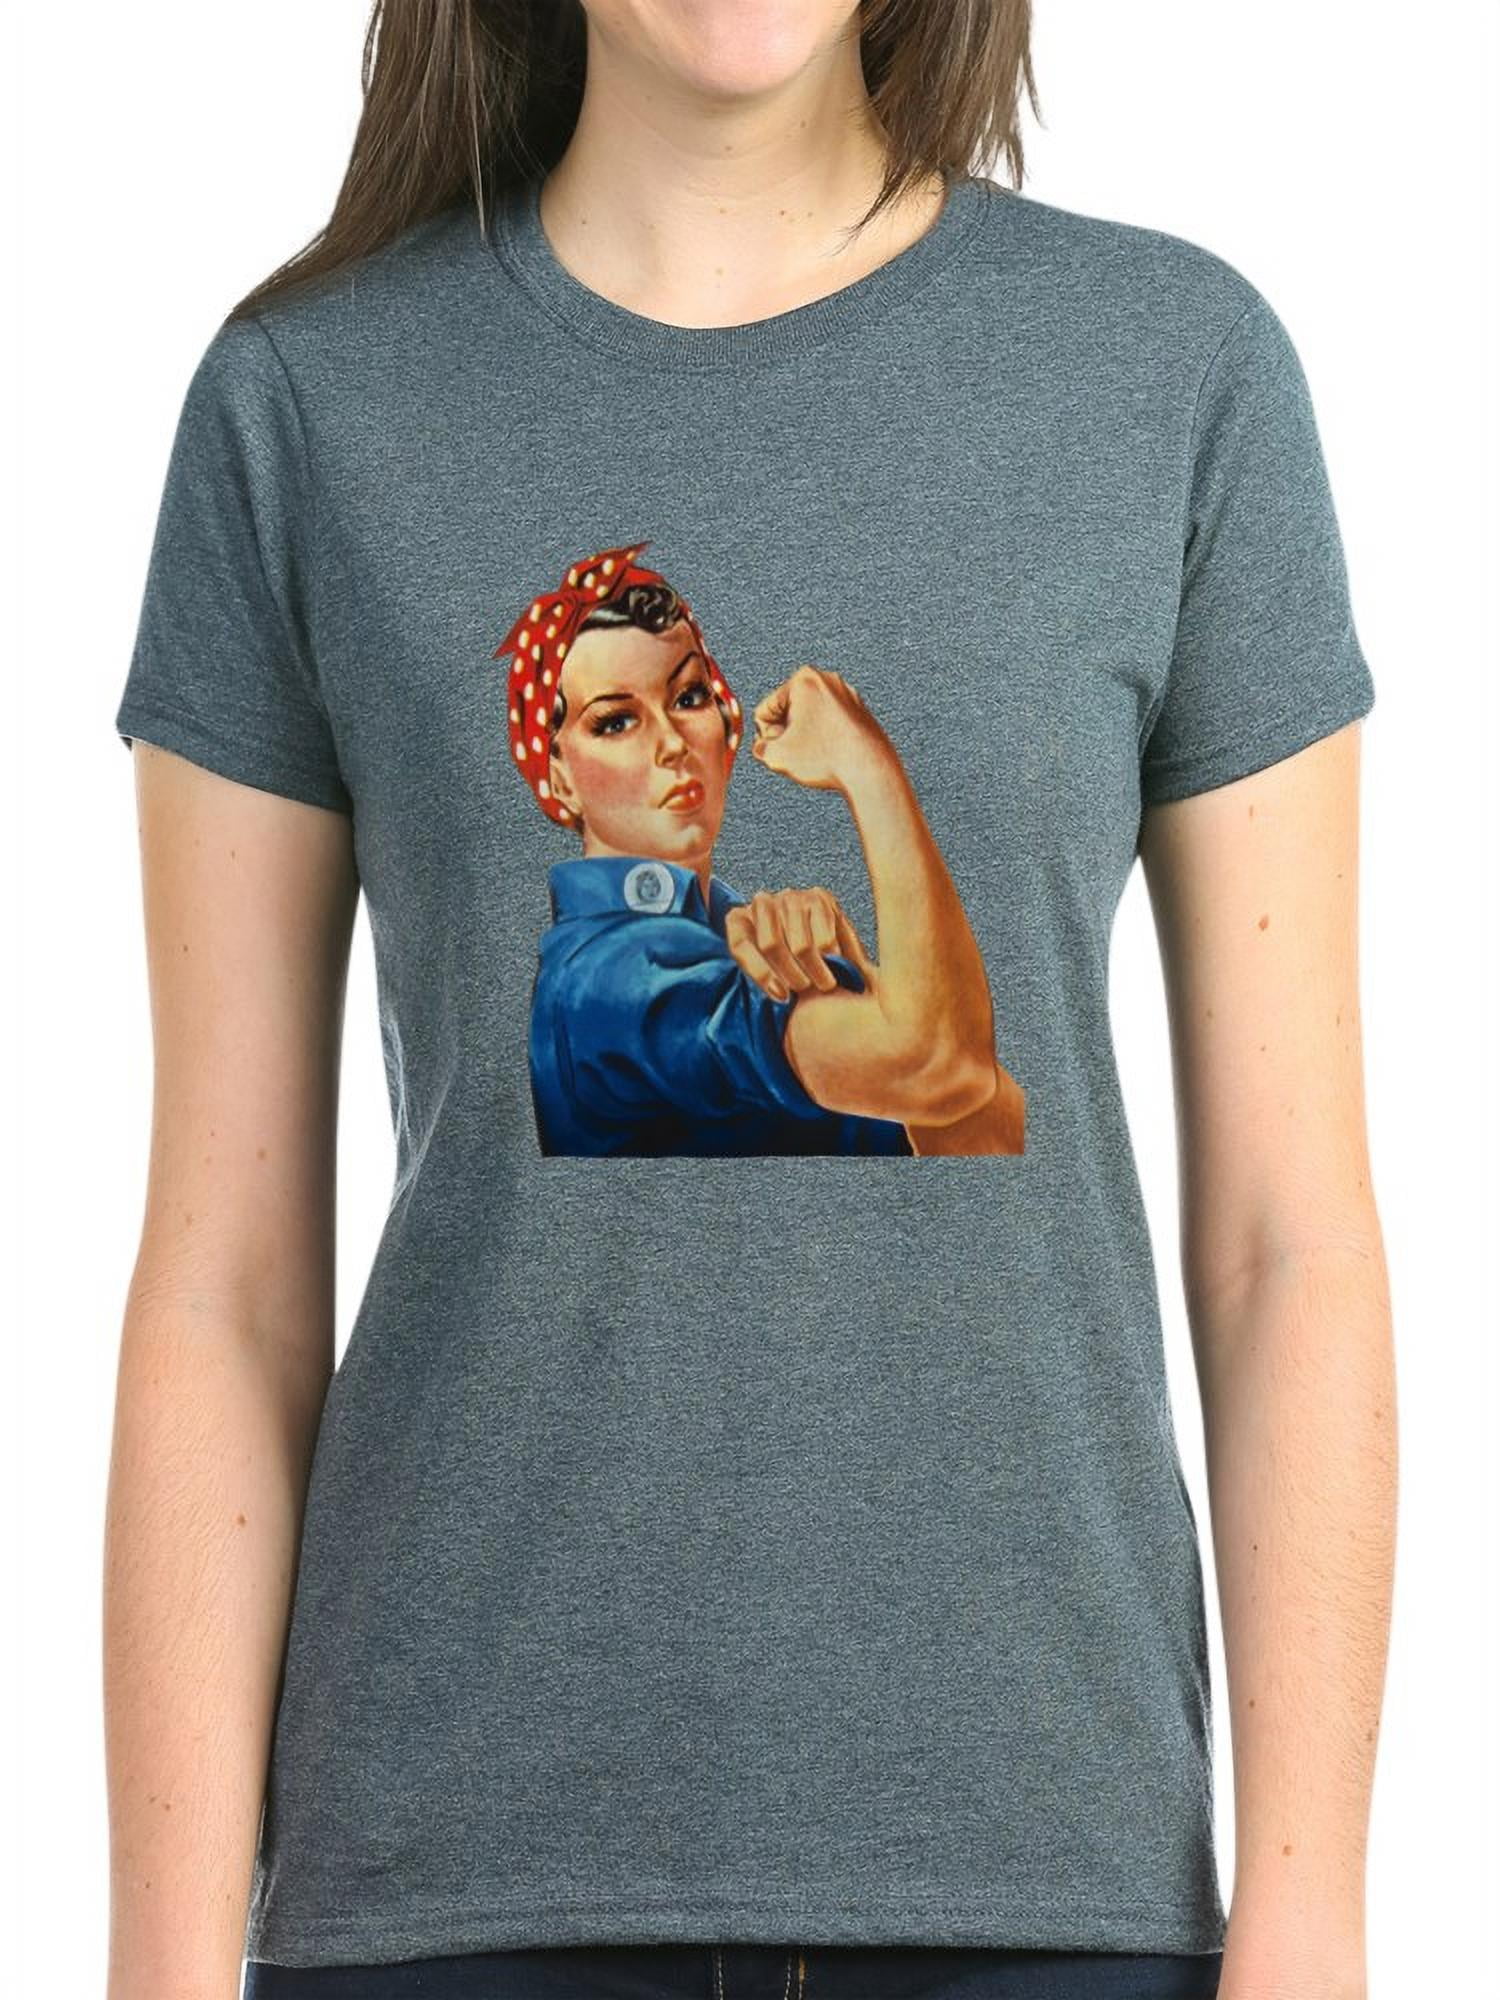 Girl's Rosie the Riveter T-shirt, Pink